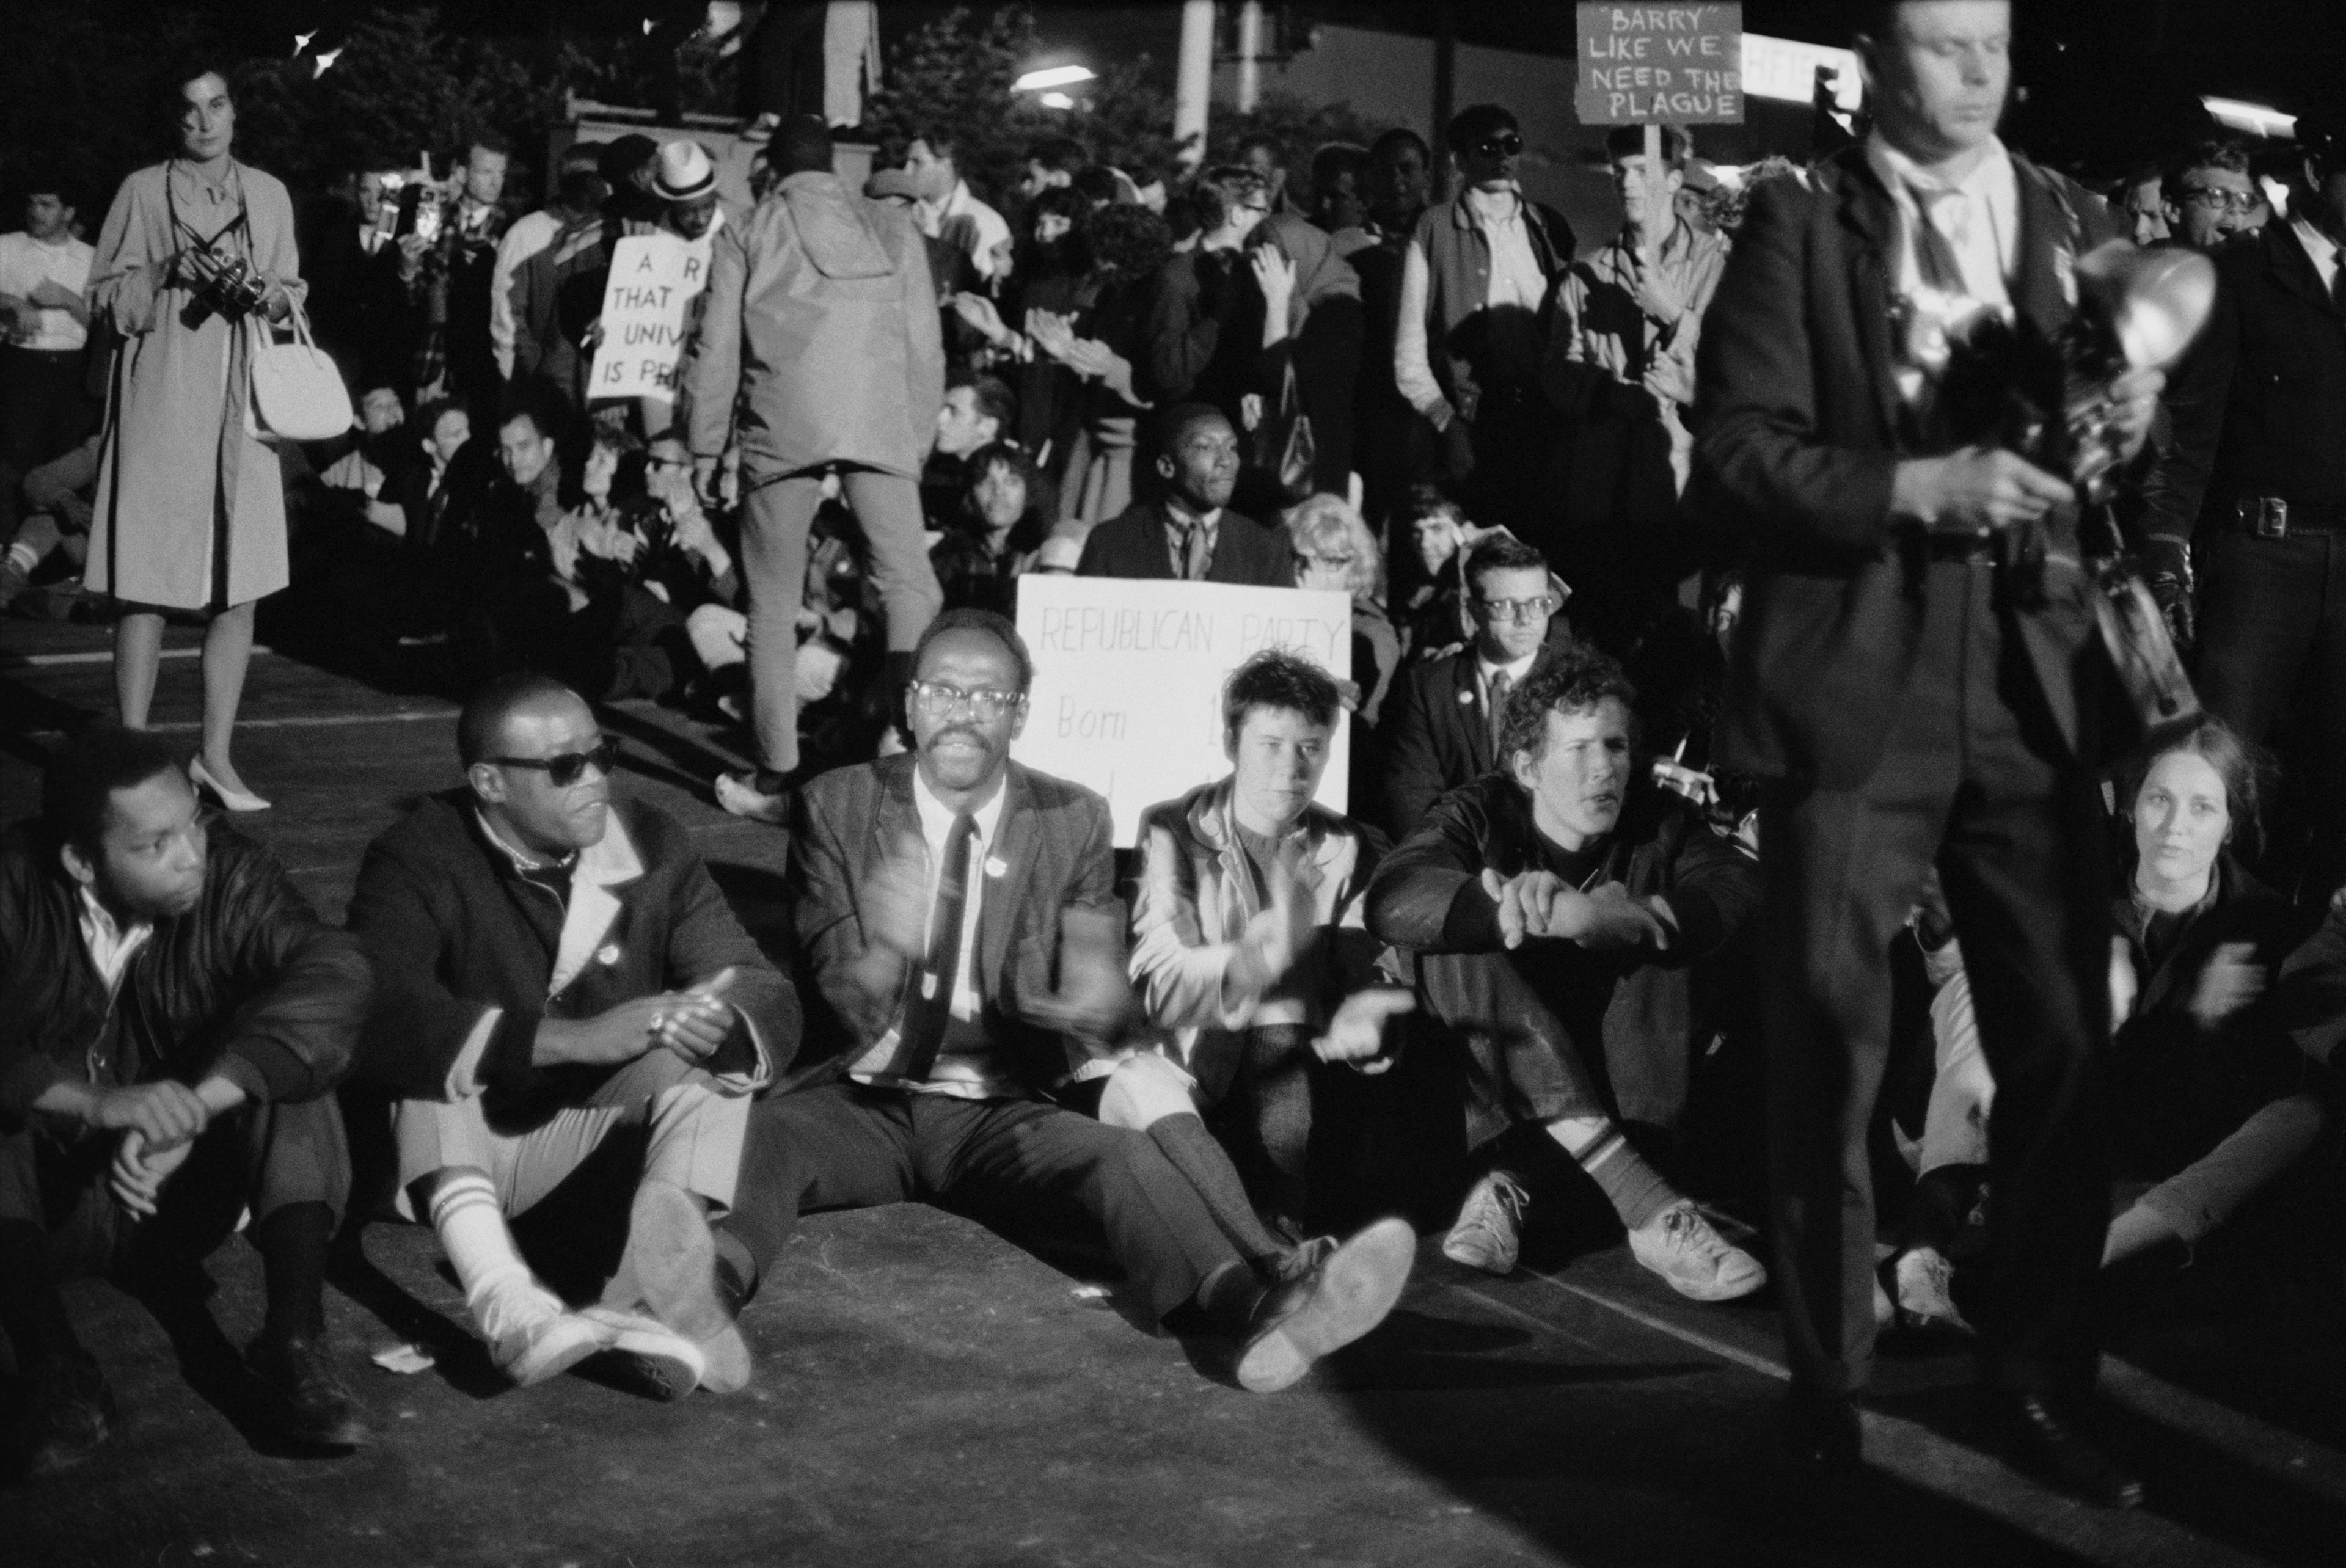 In a black and white photo, protestors gather outside the Republican National Convention at the Cow Palace in Daly City following the nomination of presidential candidate Barry Goldwater.